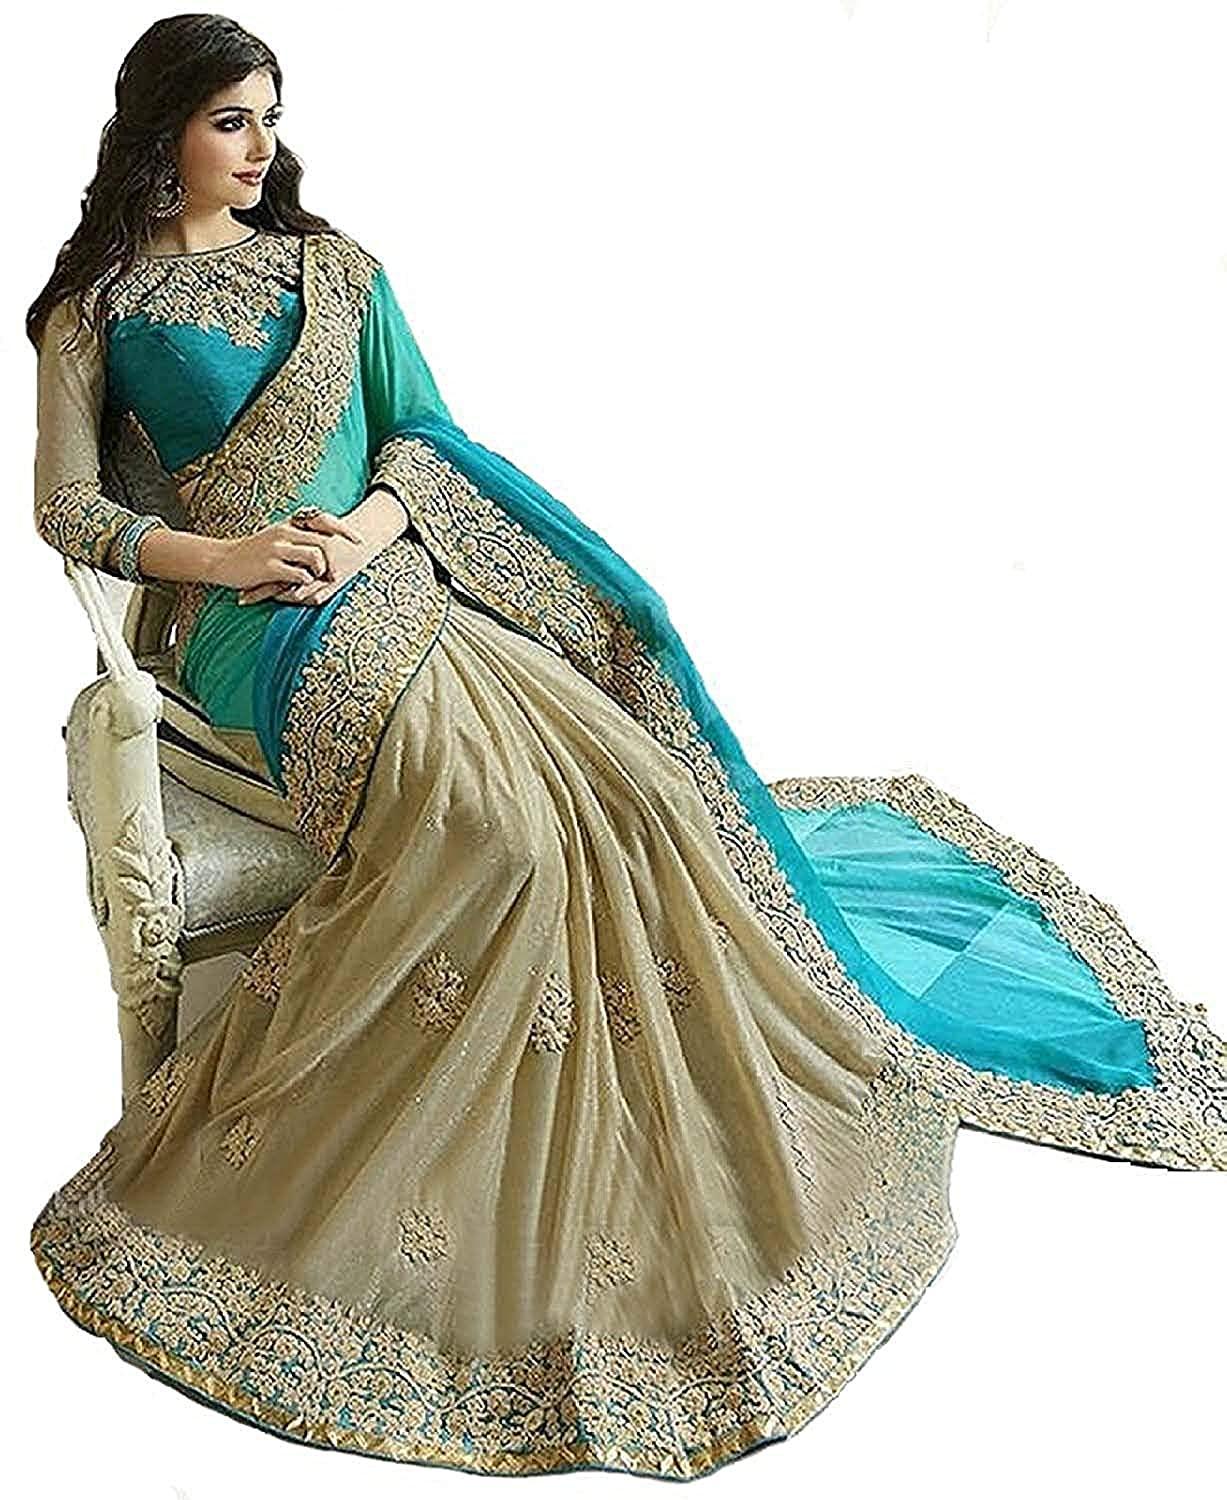 Women Bollywood Style Lycra Saree With Blouse Piece Indian Traditional Saree Wedding Dress Handmade Famous Actress Style Party Wear Free Size  Ethenic Wear Clothes For Women Embroidered - FajarShuruqSA